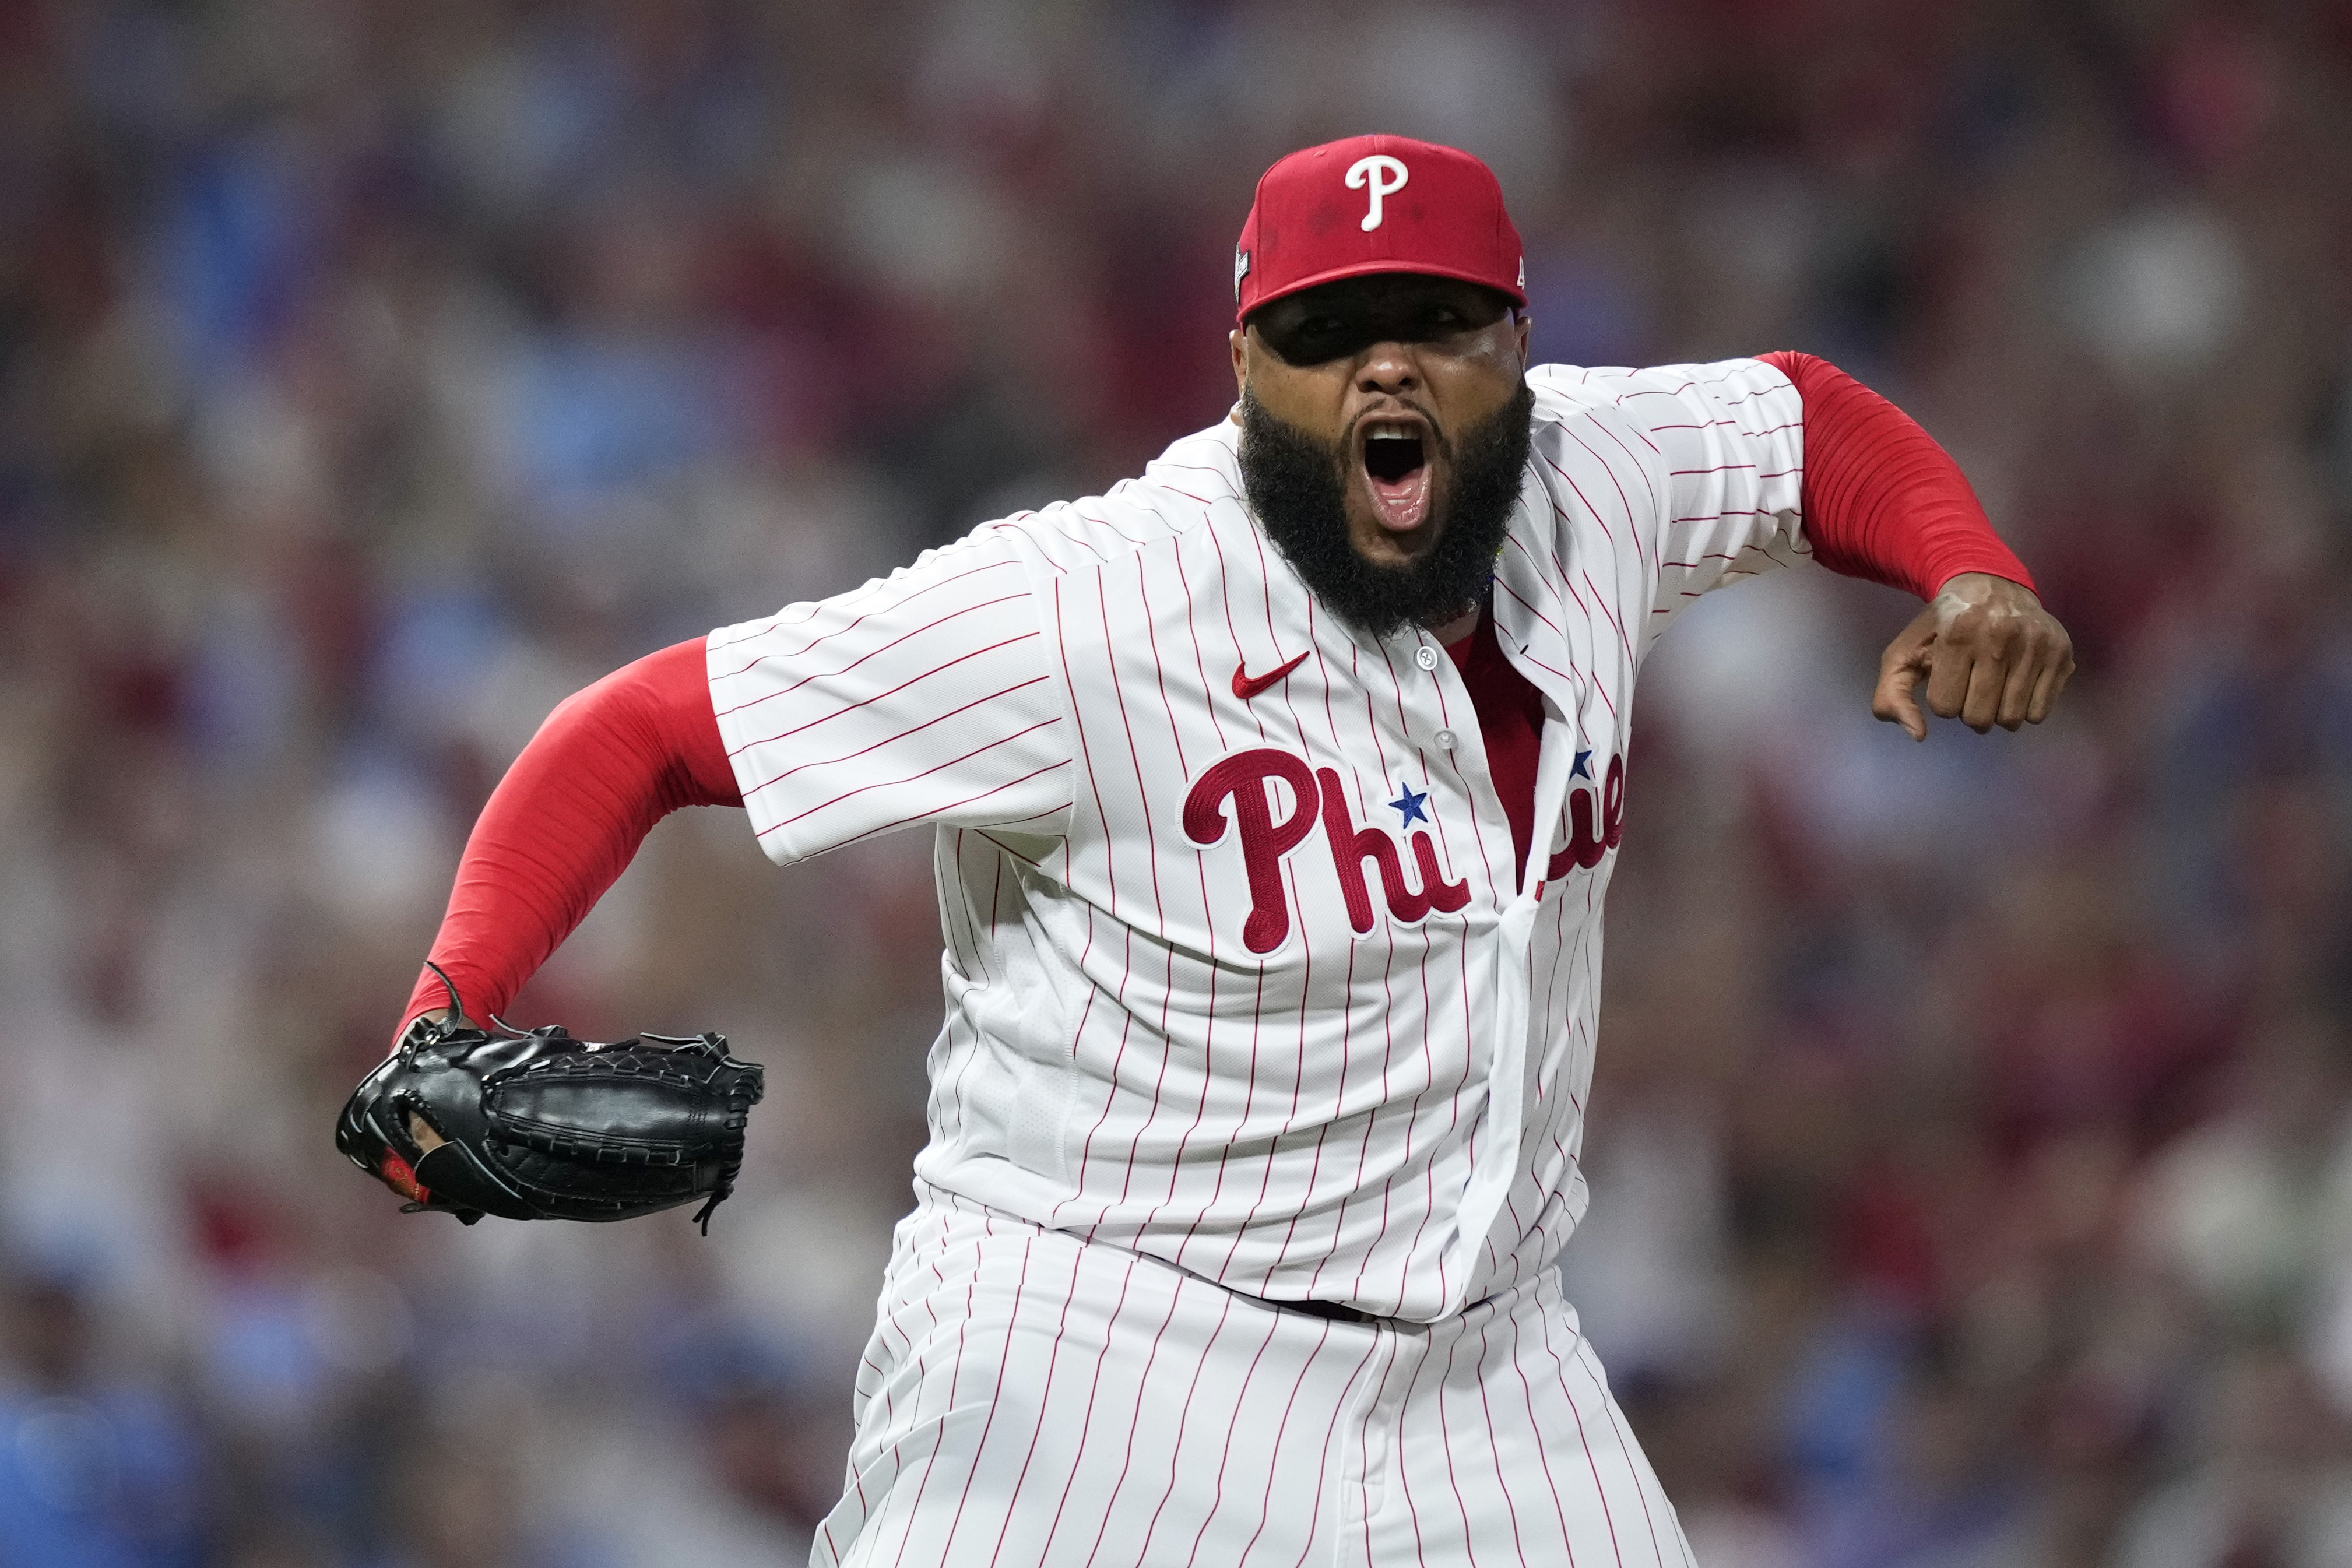 watch phillies game live